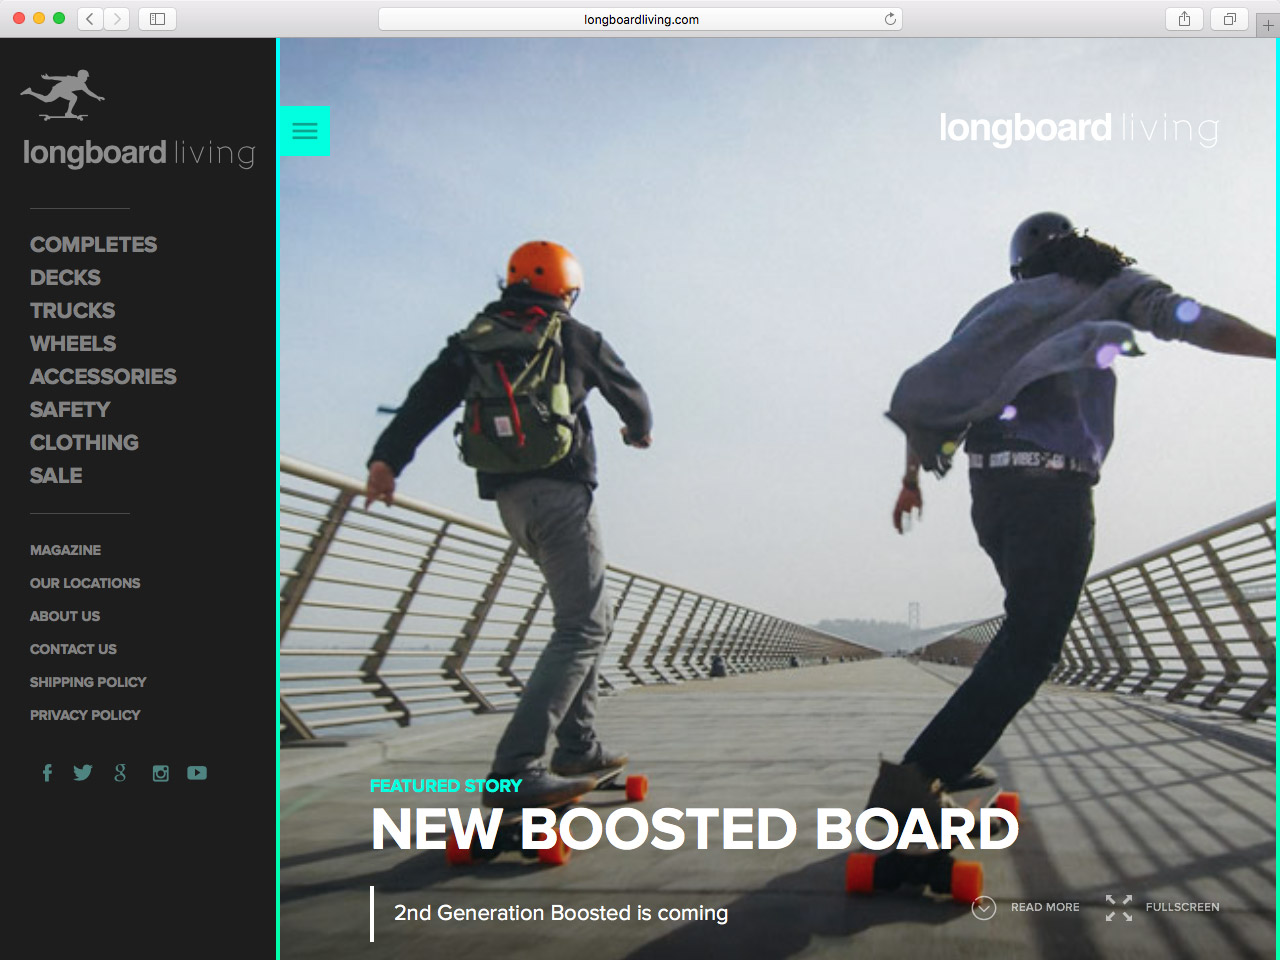 A real-world example of a vertical list on Longboard Living's website